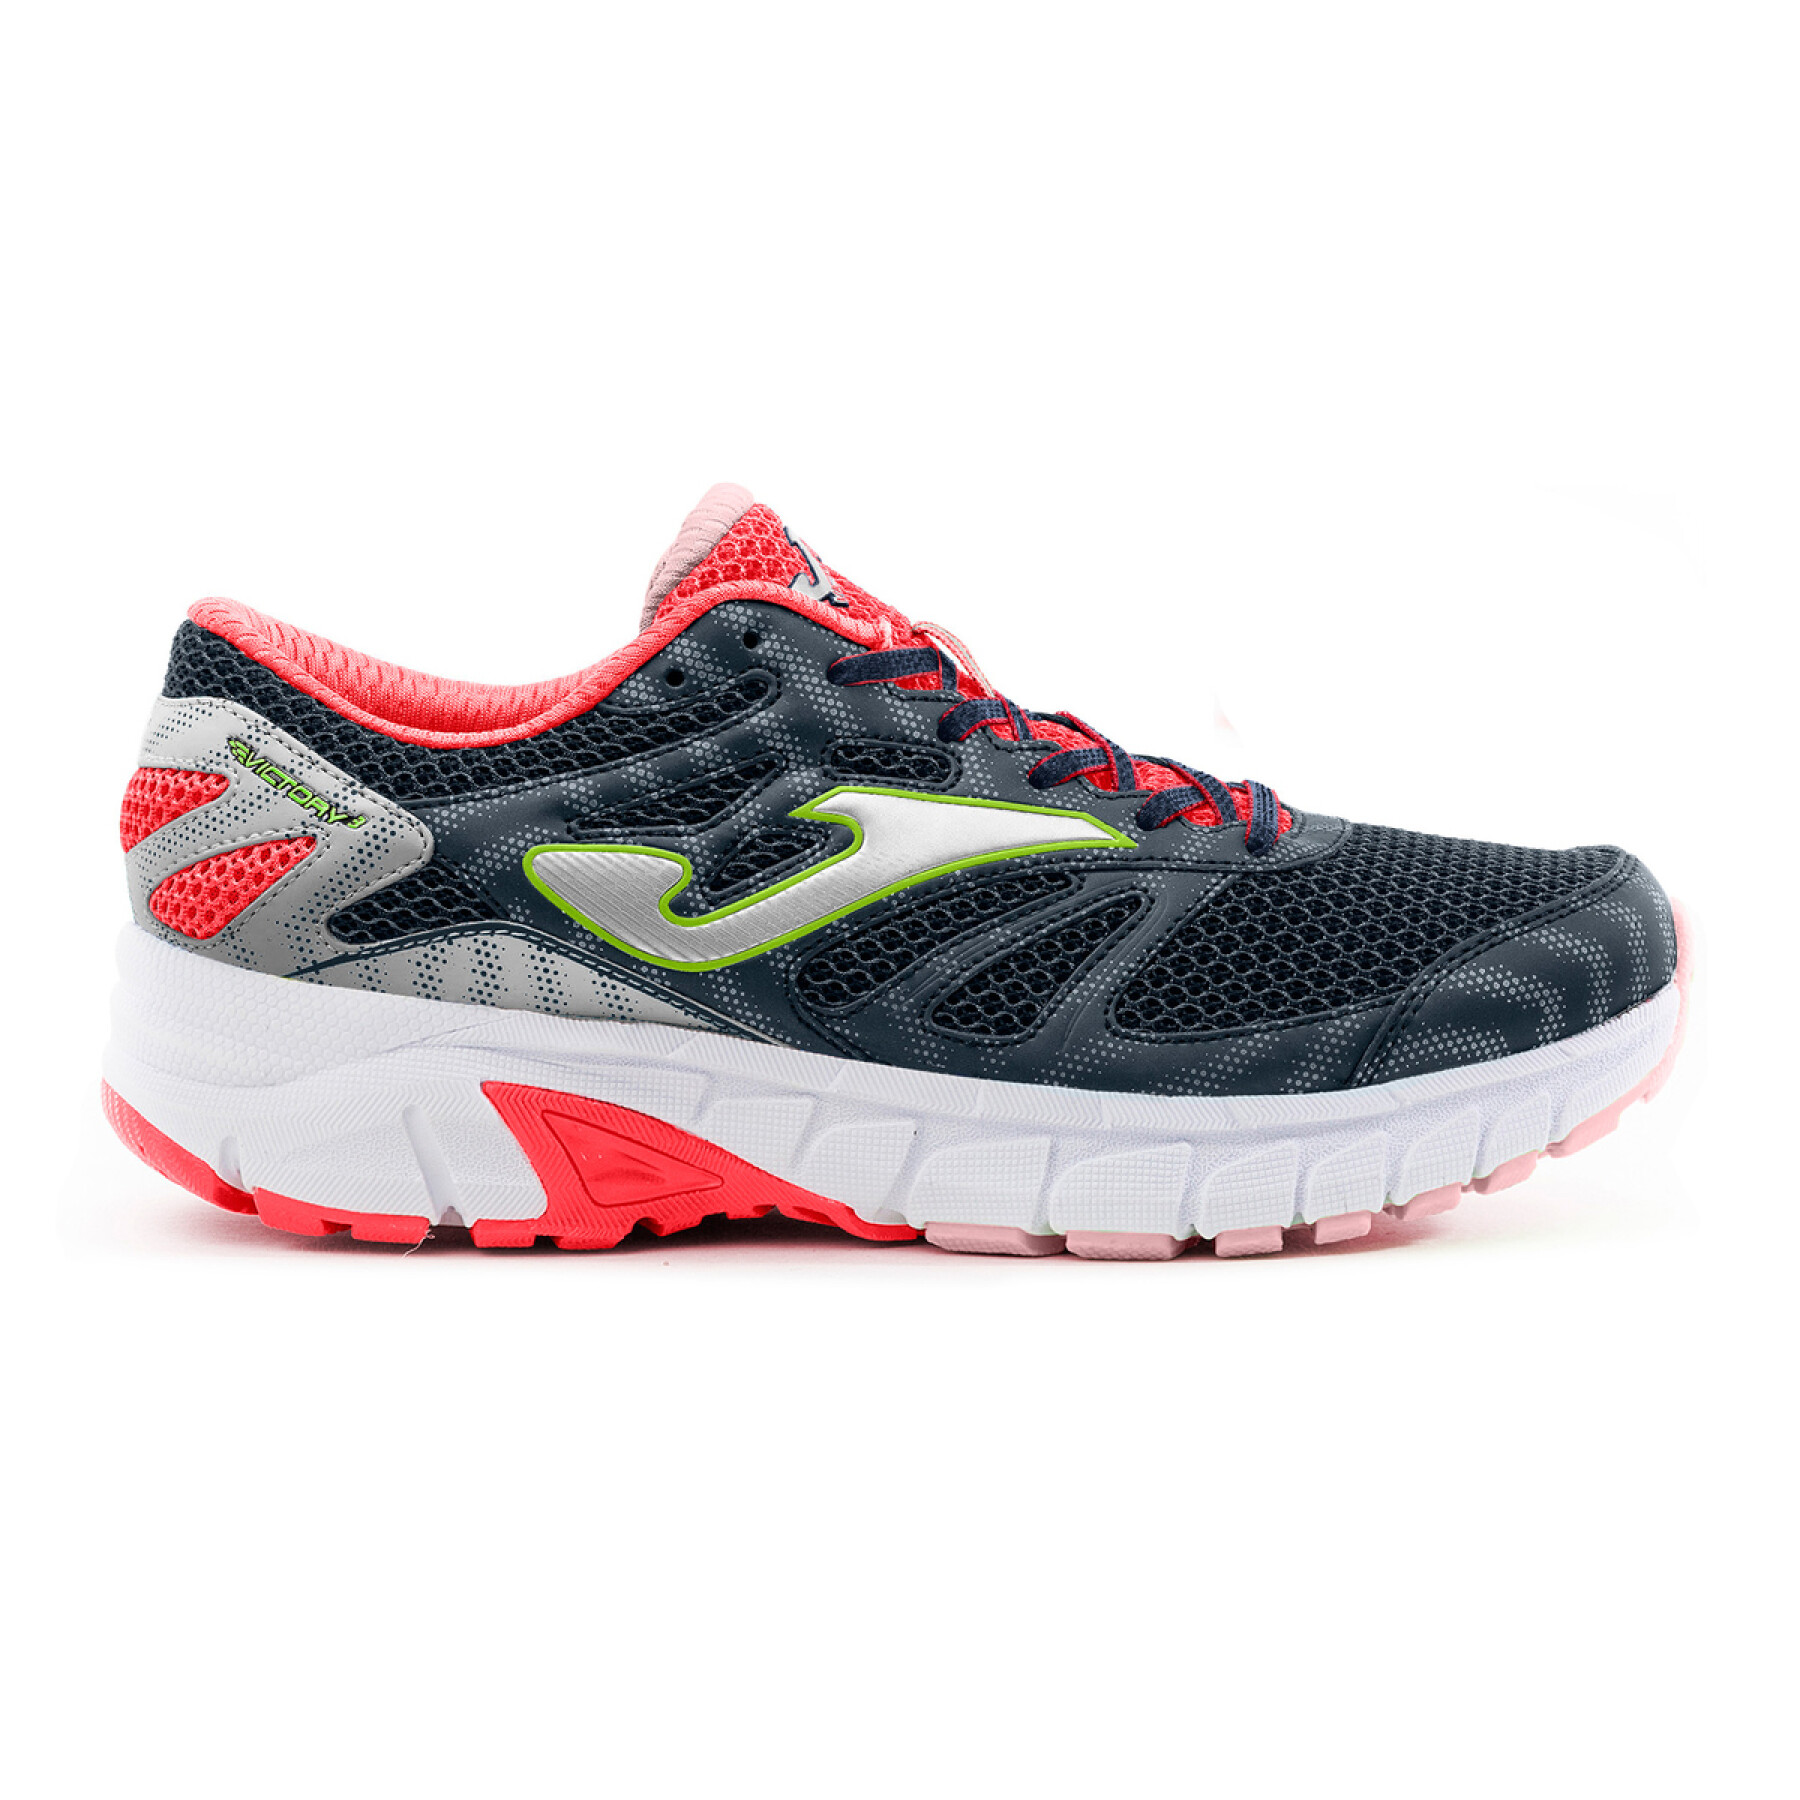 Children's shoes Joma Victory J 2033